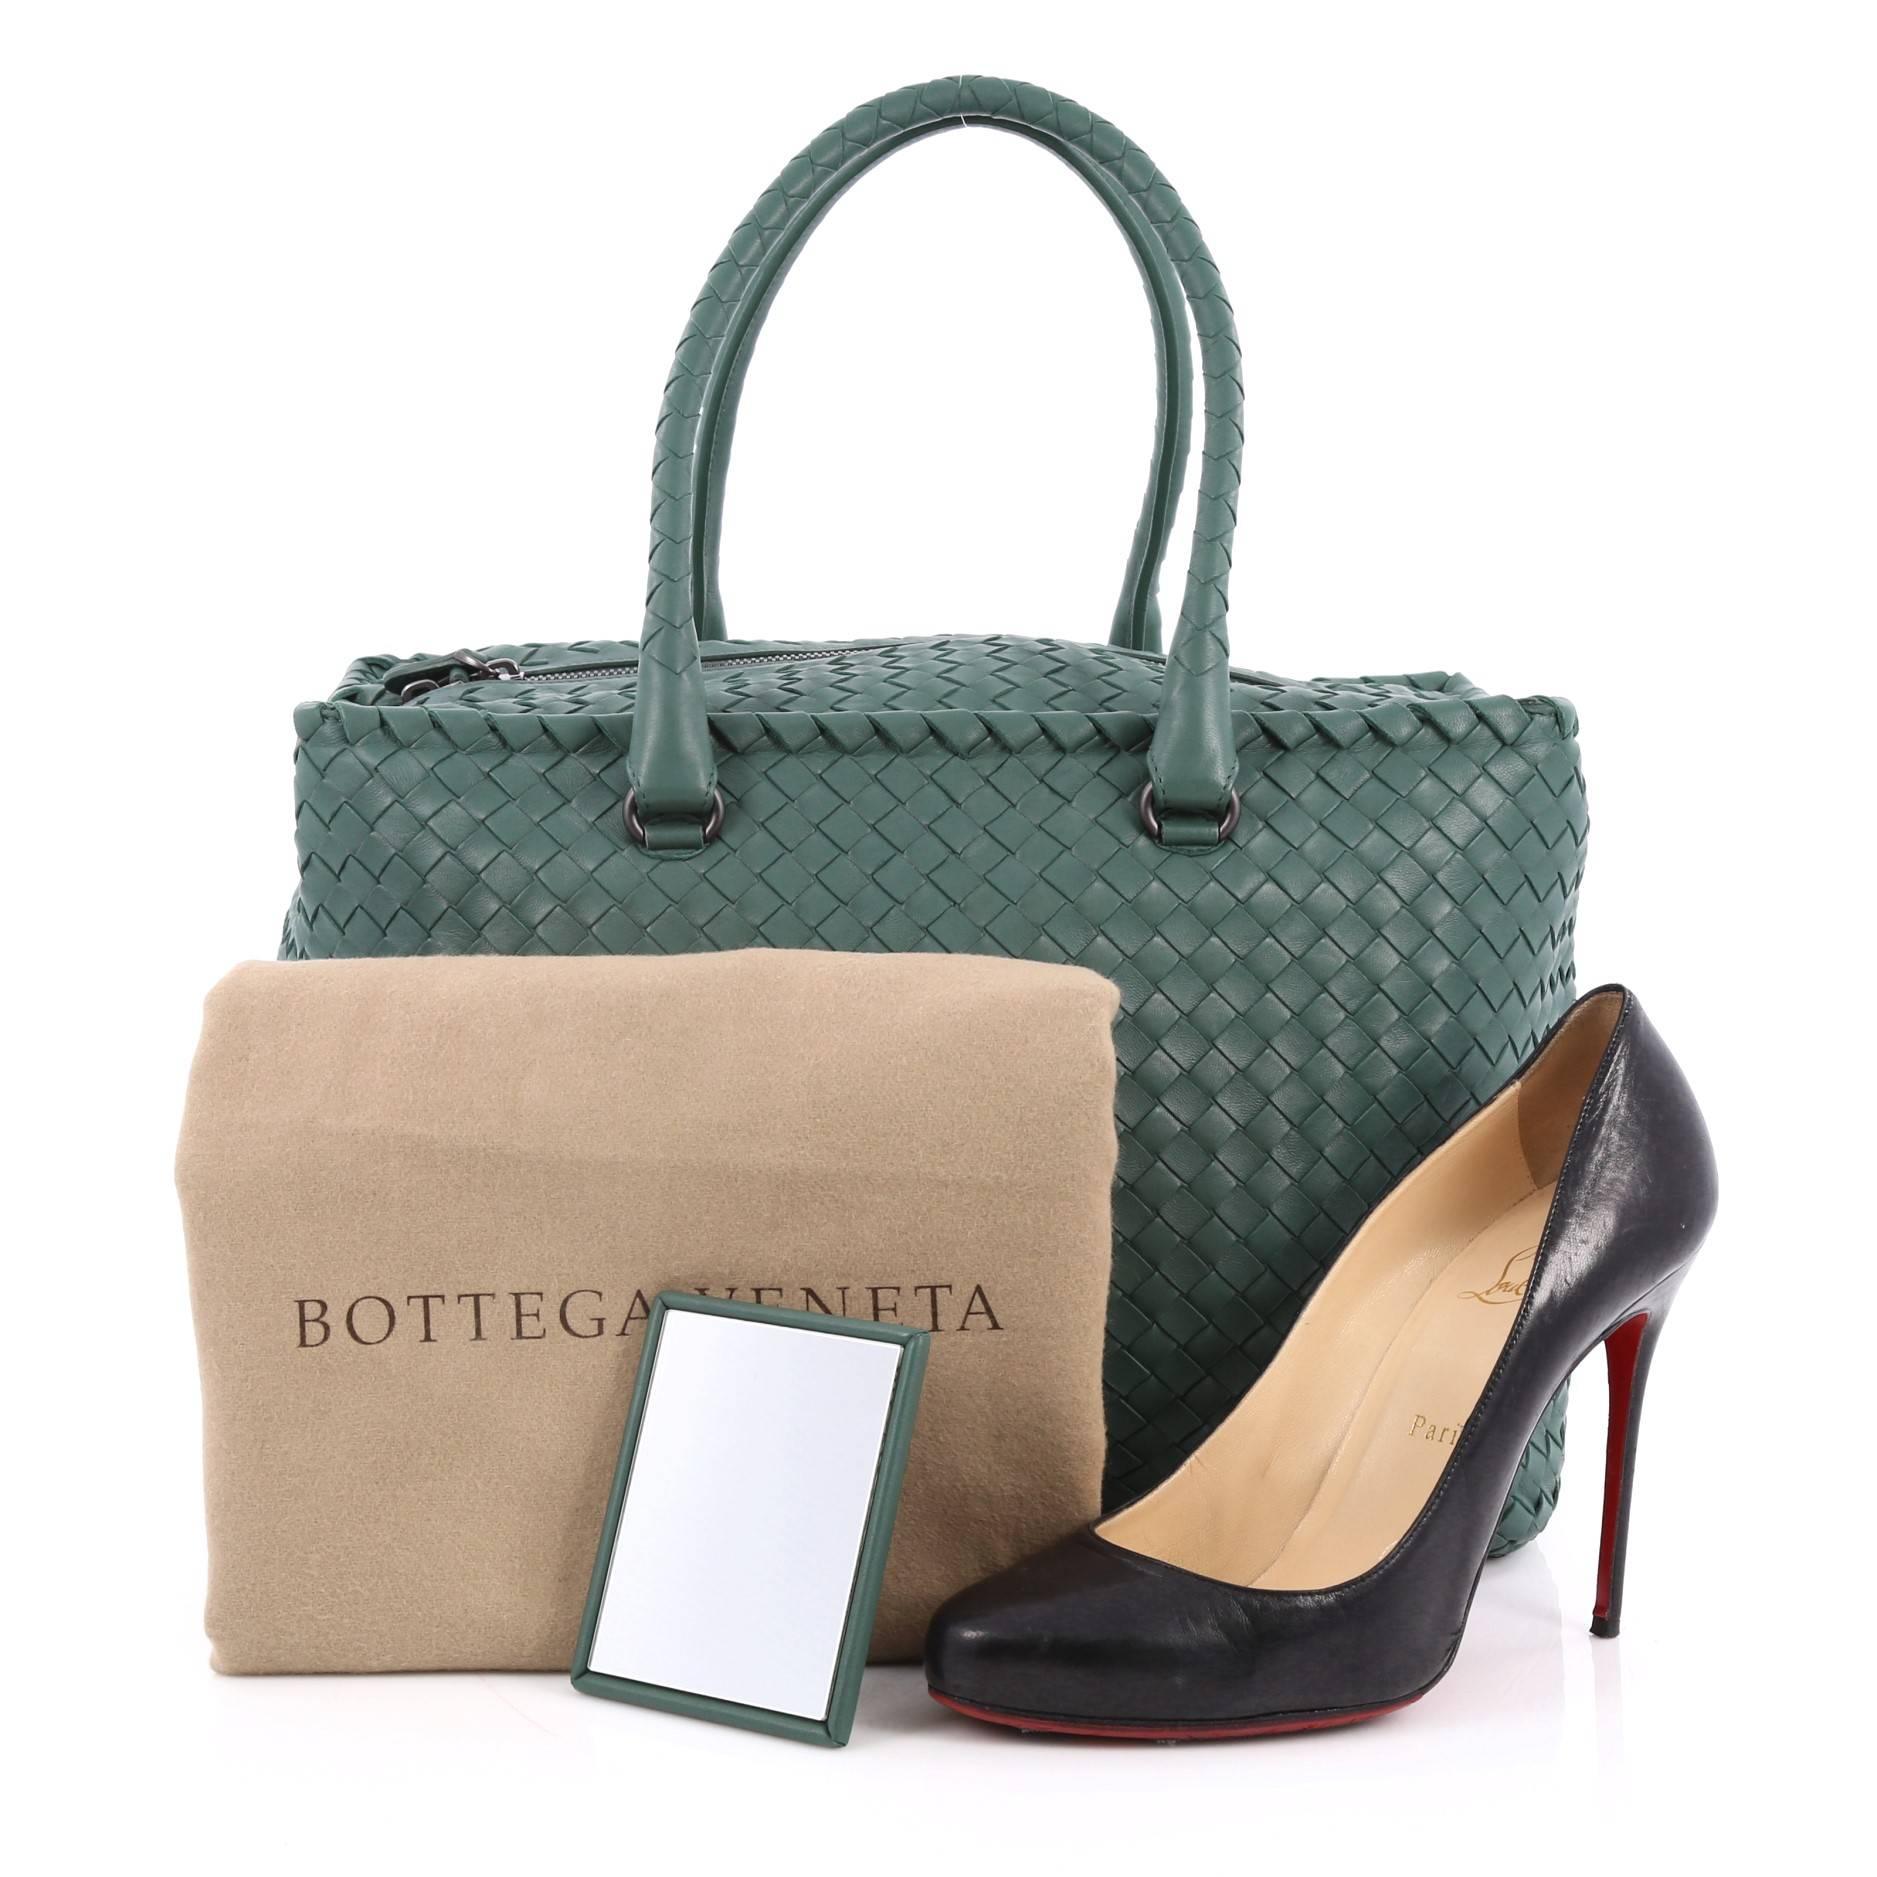 This authentic Bottega Veneta Brick Bag Intrecciato Nappa Medium makes a perfect everyday bag and will fit your everyday style. Crafted from sea green leather woven in Bottega Veneta's signature intrecciato method, this gorgeous bag features